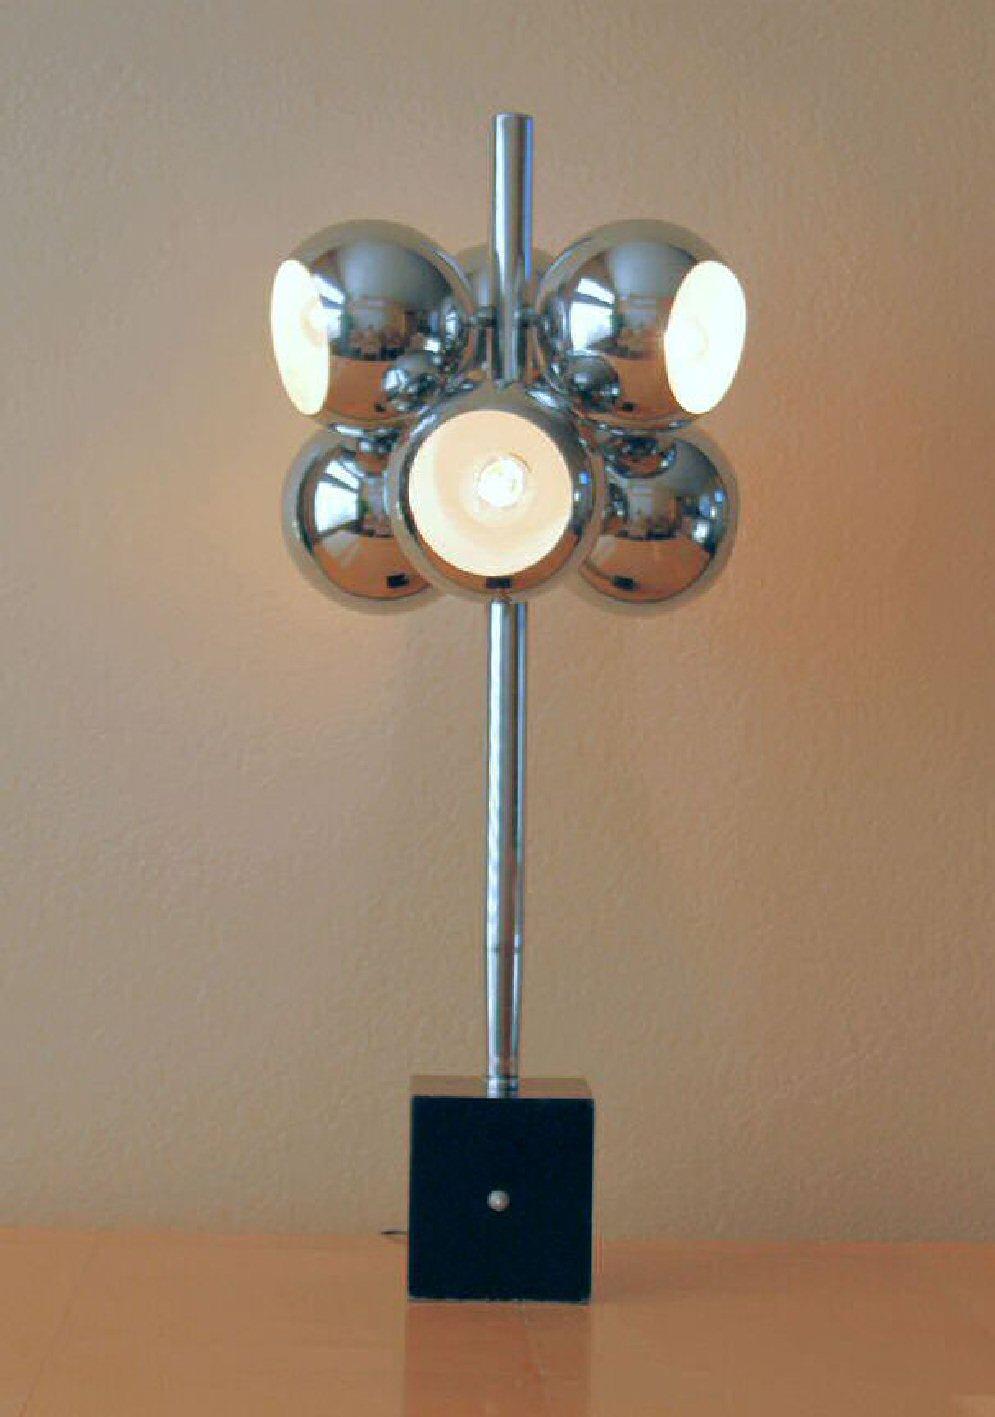 SONNEMAN!

MID CENTURY MODERN
ATOMIC AGE
CHROME TOWER
TABLE LAMP!


ICONIC!

EPIC DESIGN!
CIRCA 1967
DIMENSIONS: HEIGHT 33